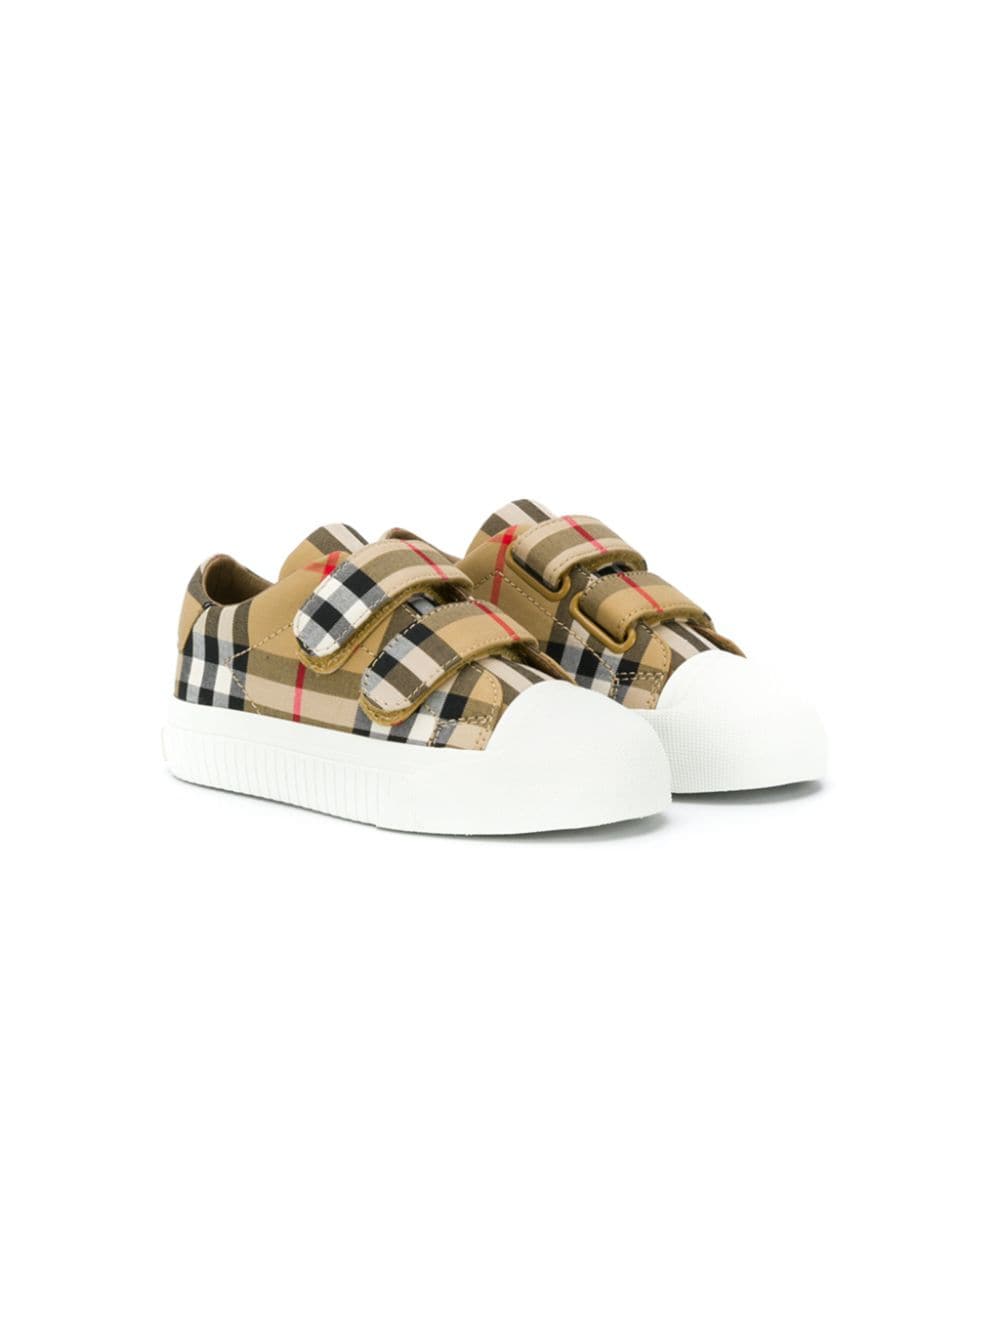 burberry shoes kids online